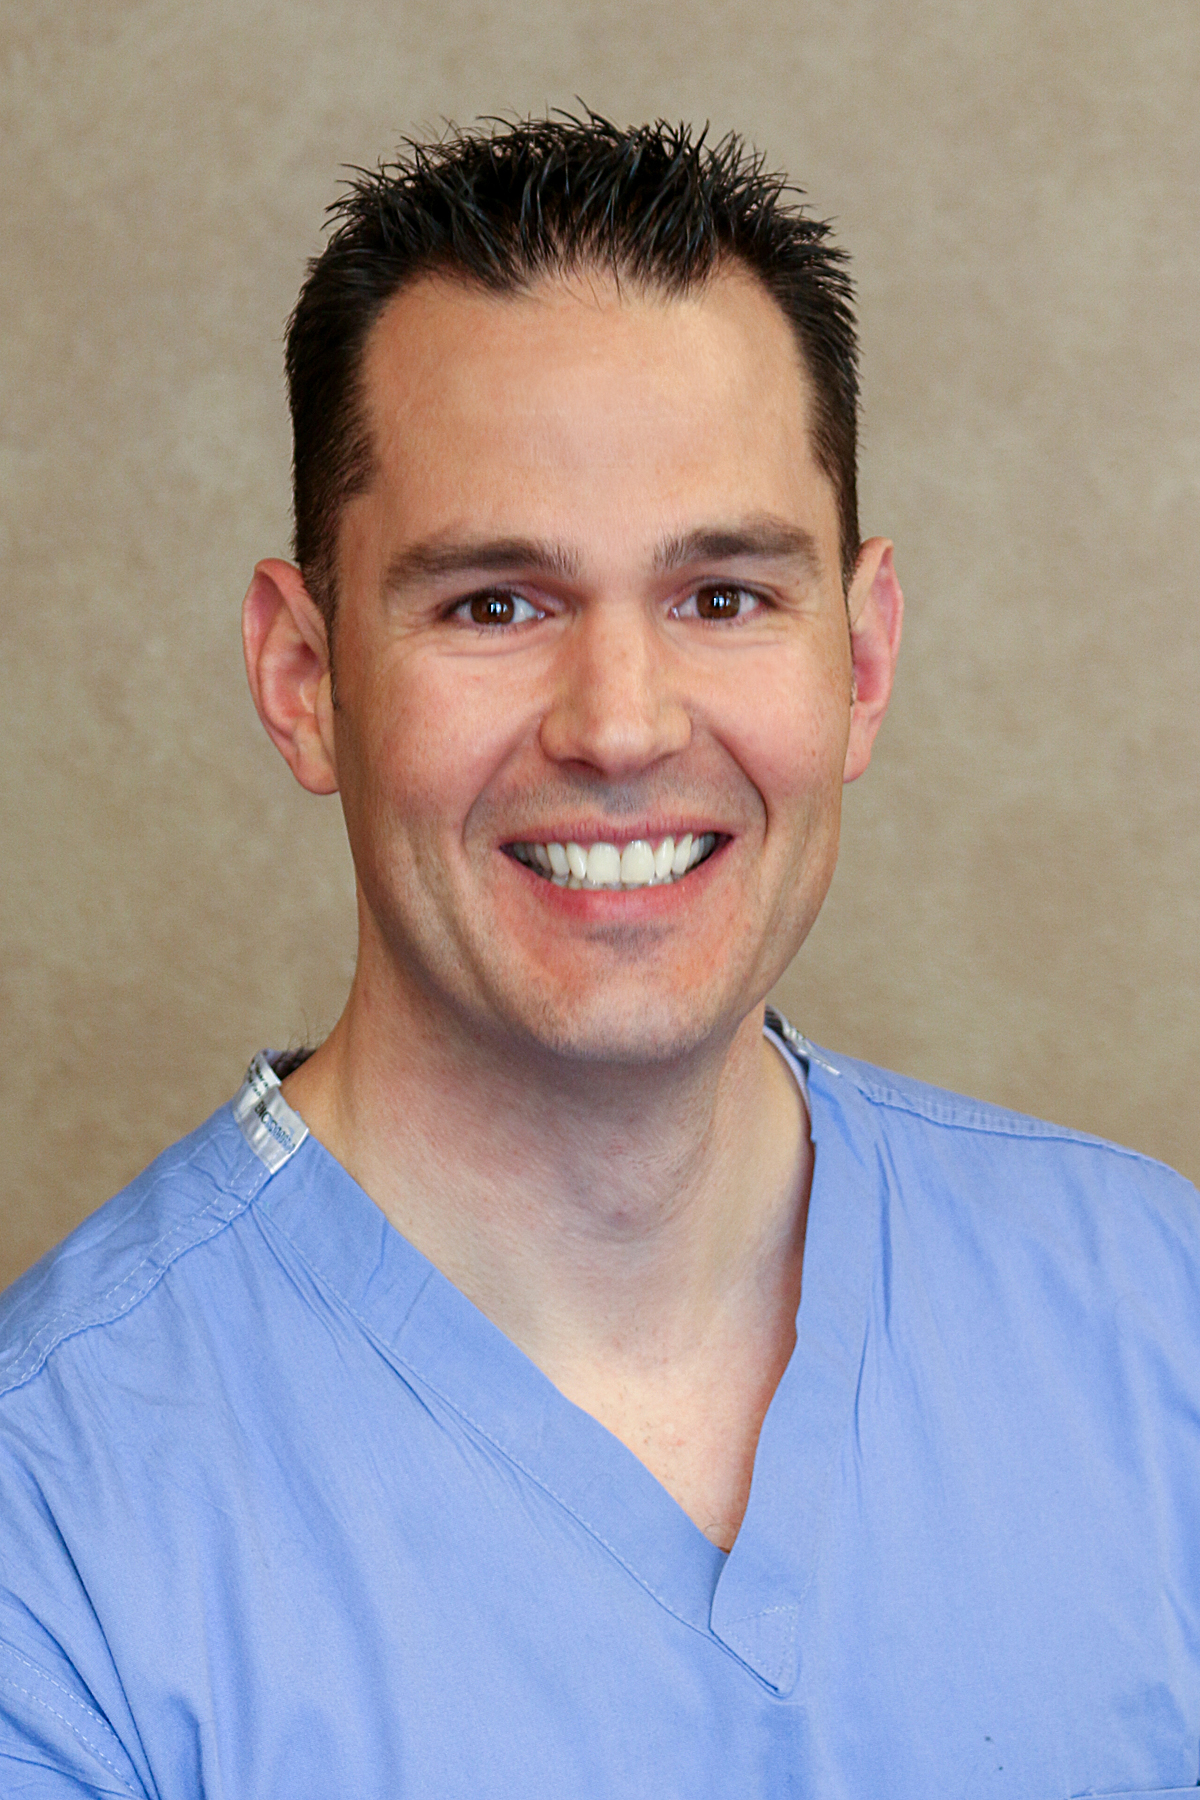 Brett D. Sachs, DPM, FACFAS Co-Author: Steven Cooperman, DPM Rocky Mountain Foot and Ankle Center